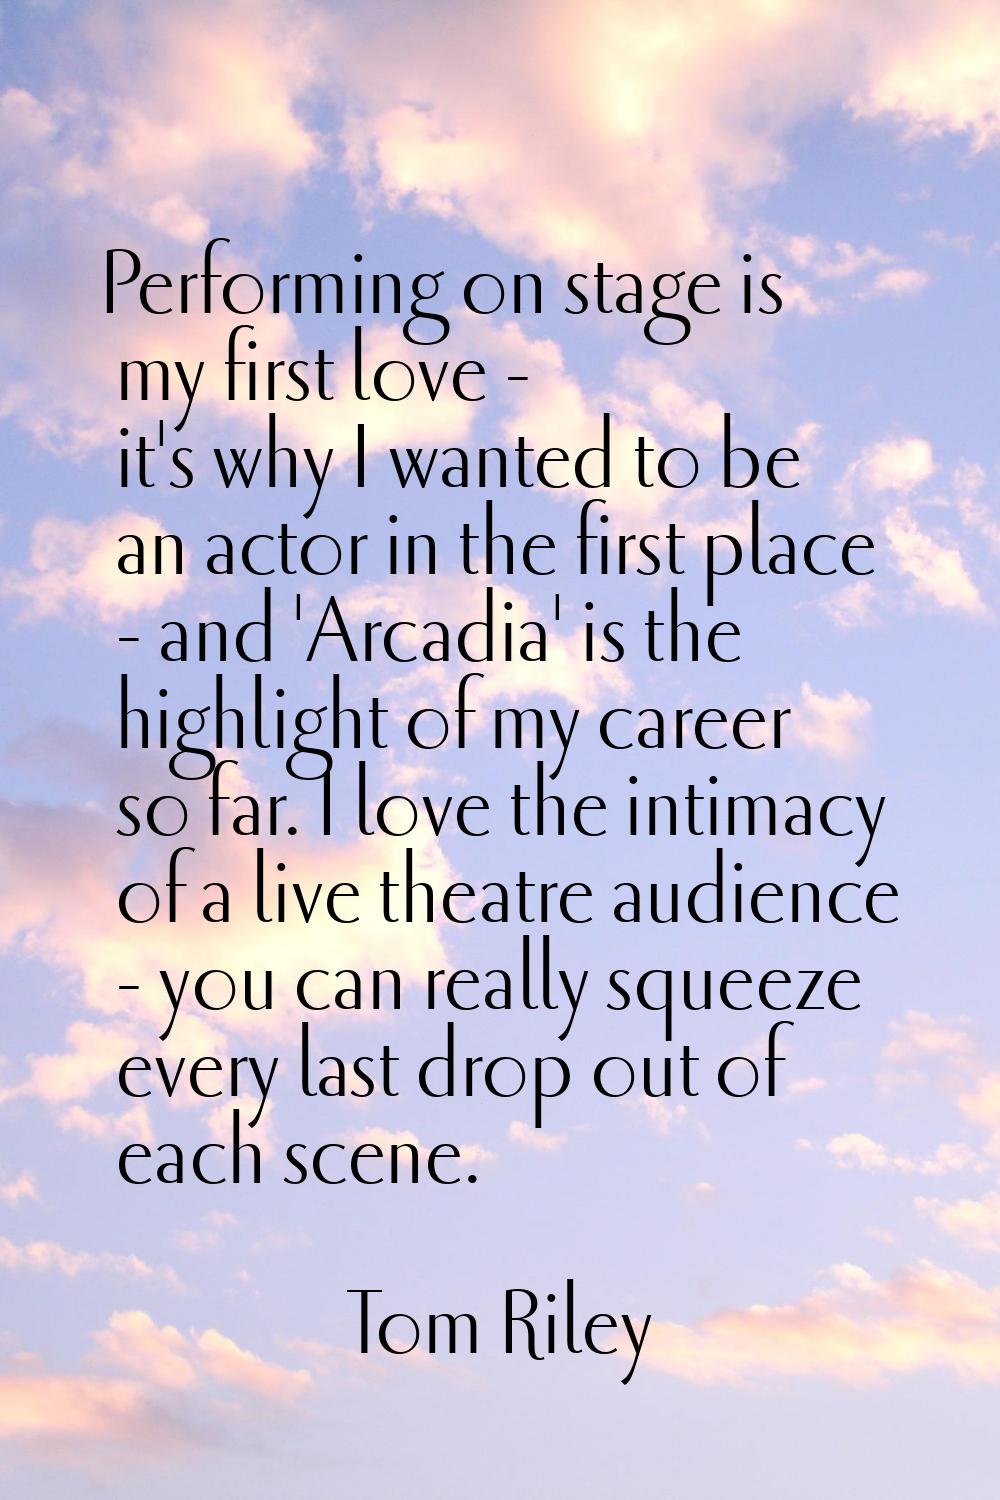 Performing on stage is my first love - it's why I wanted to be an actor in the first place - and 'A